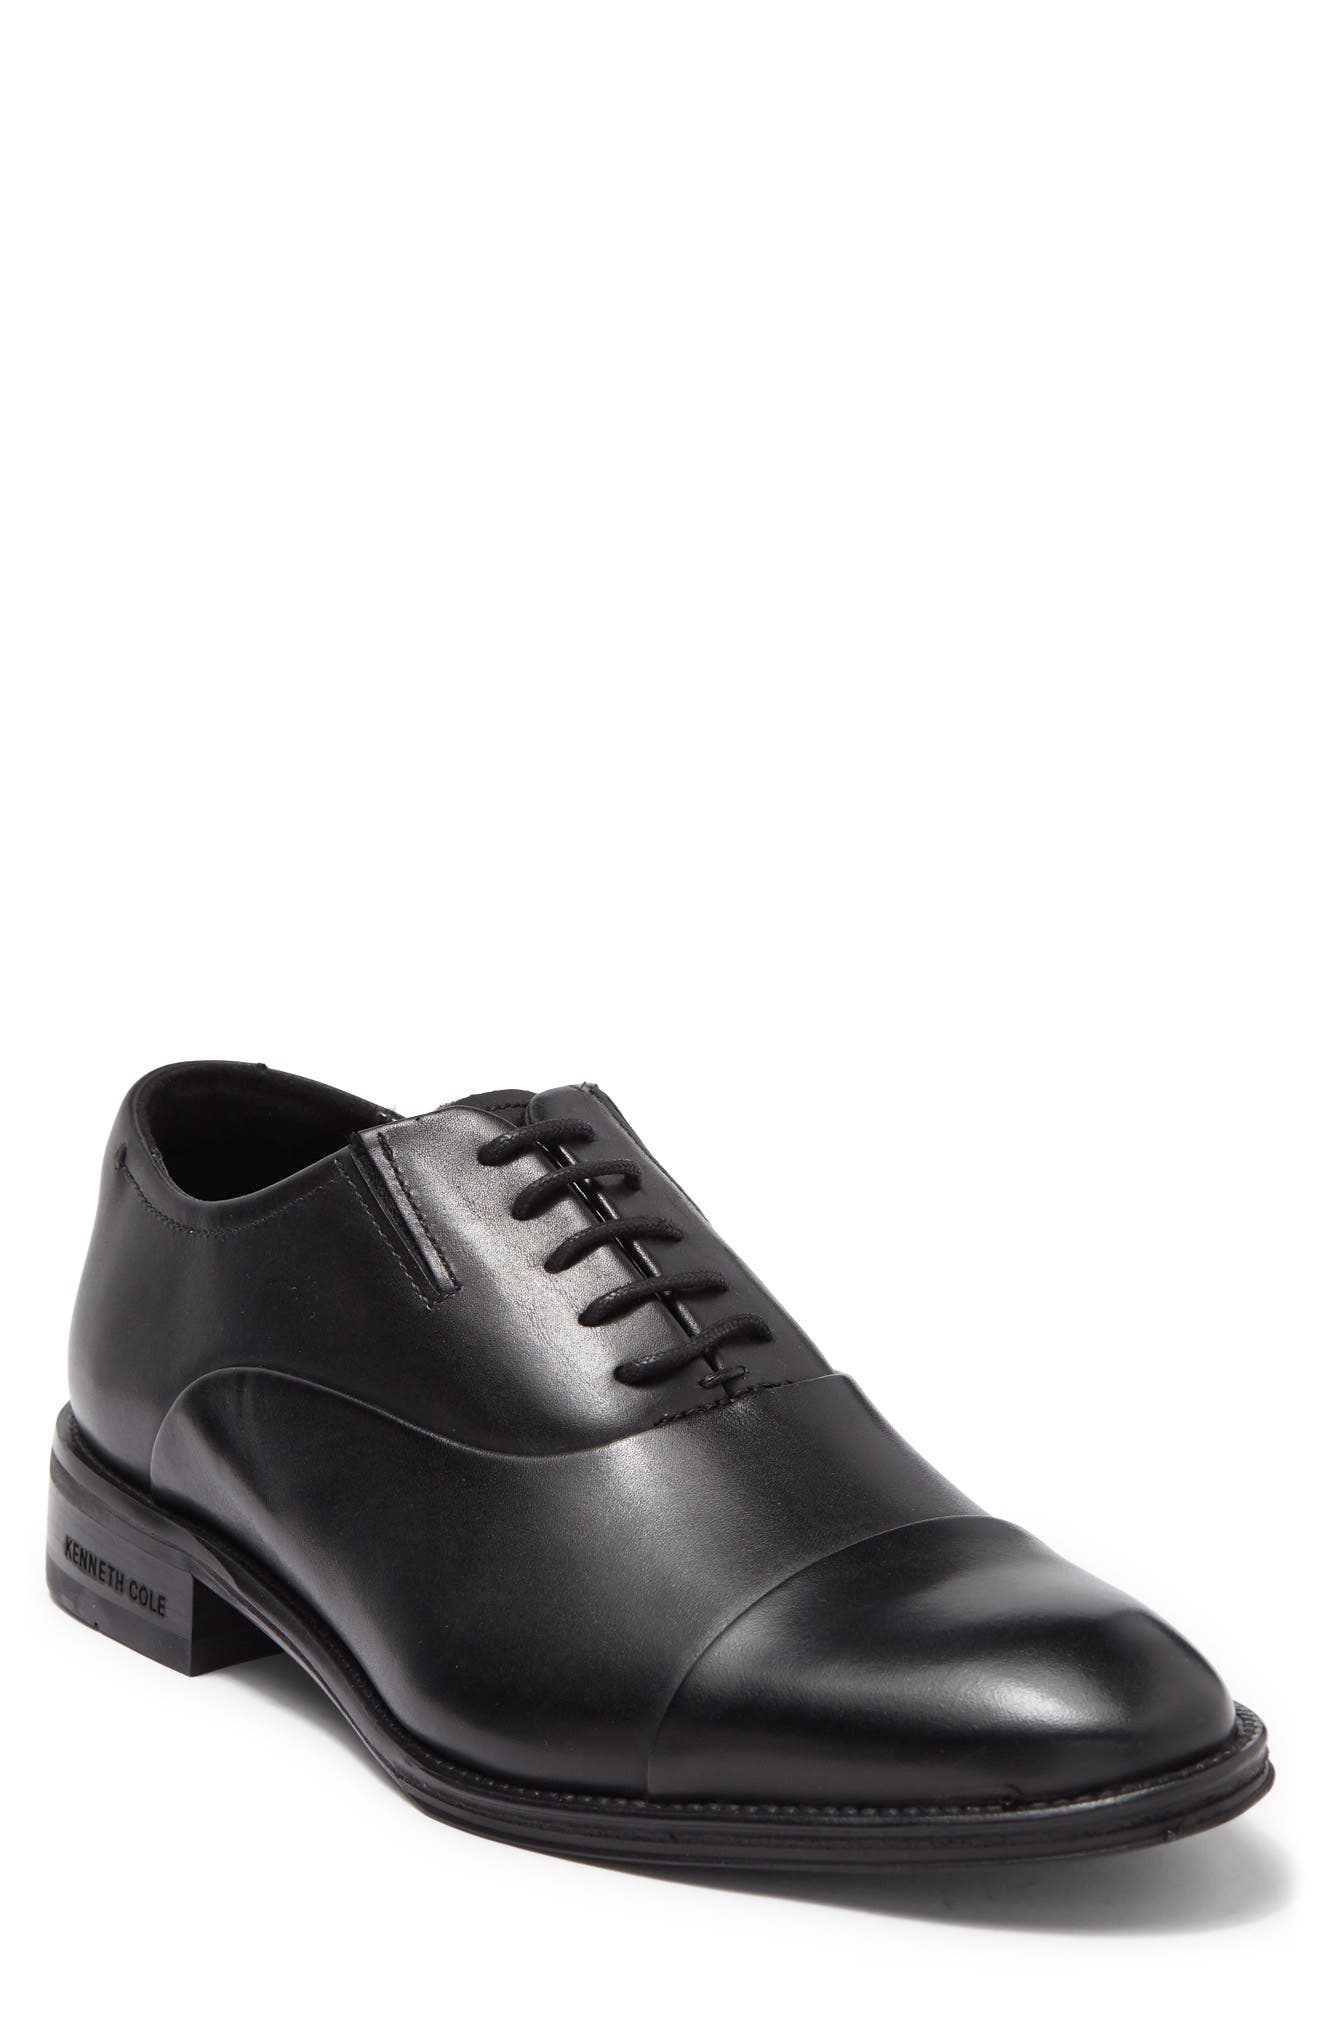 Kenneth Cole New York Mens Vertical Lace Up Oxford